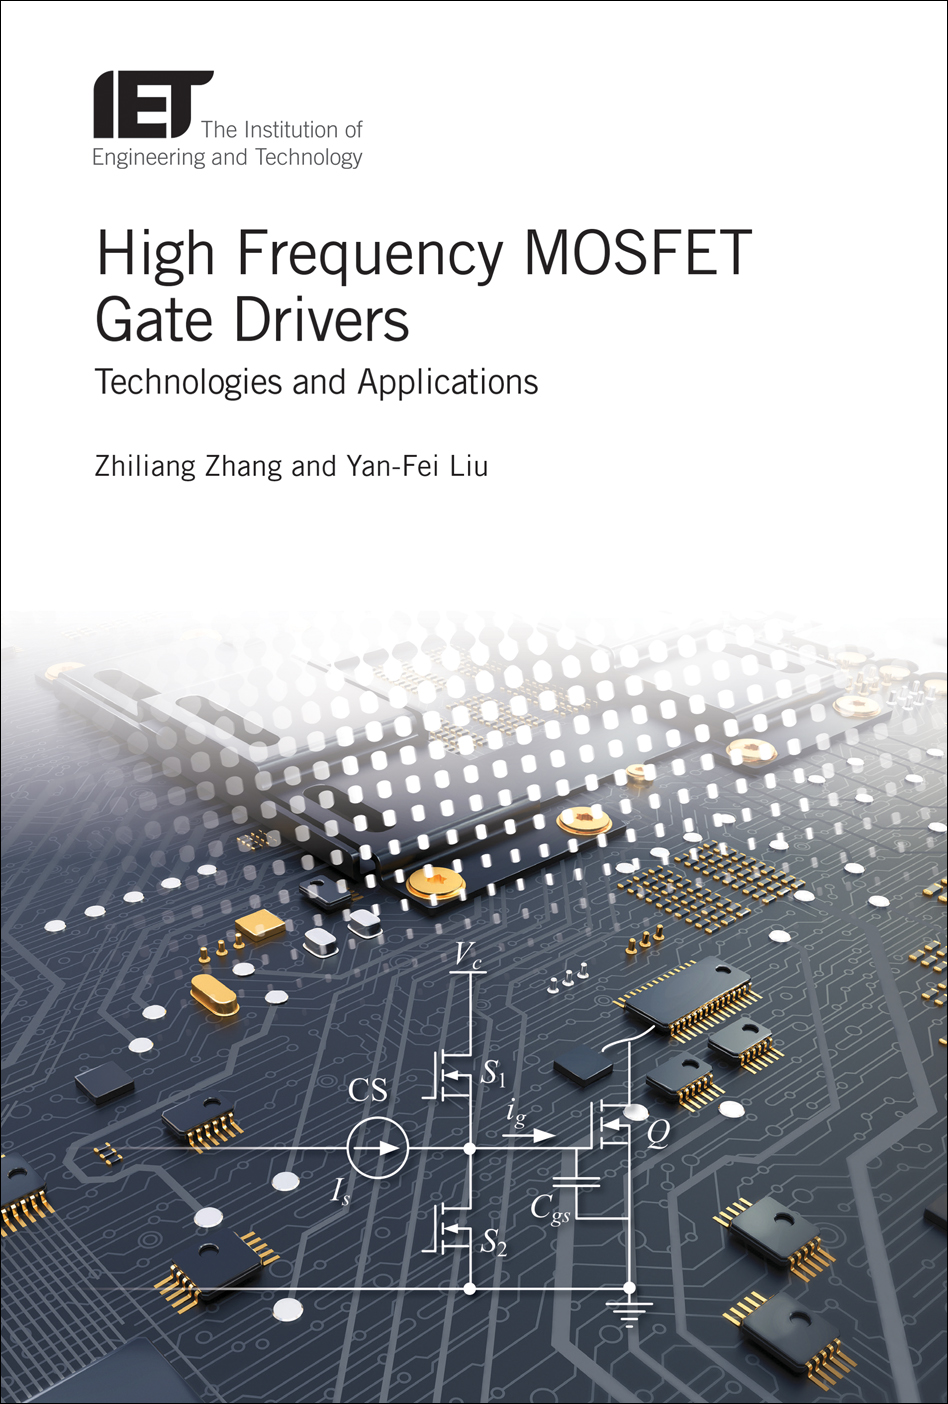 High Frequency MOSFET Gate Drivers, Technologies and applications